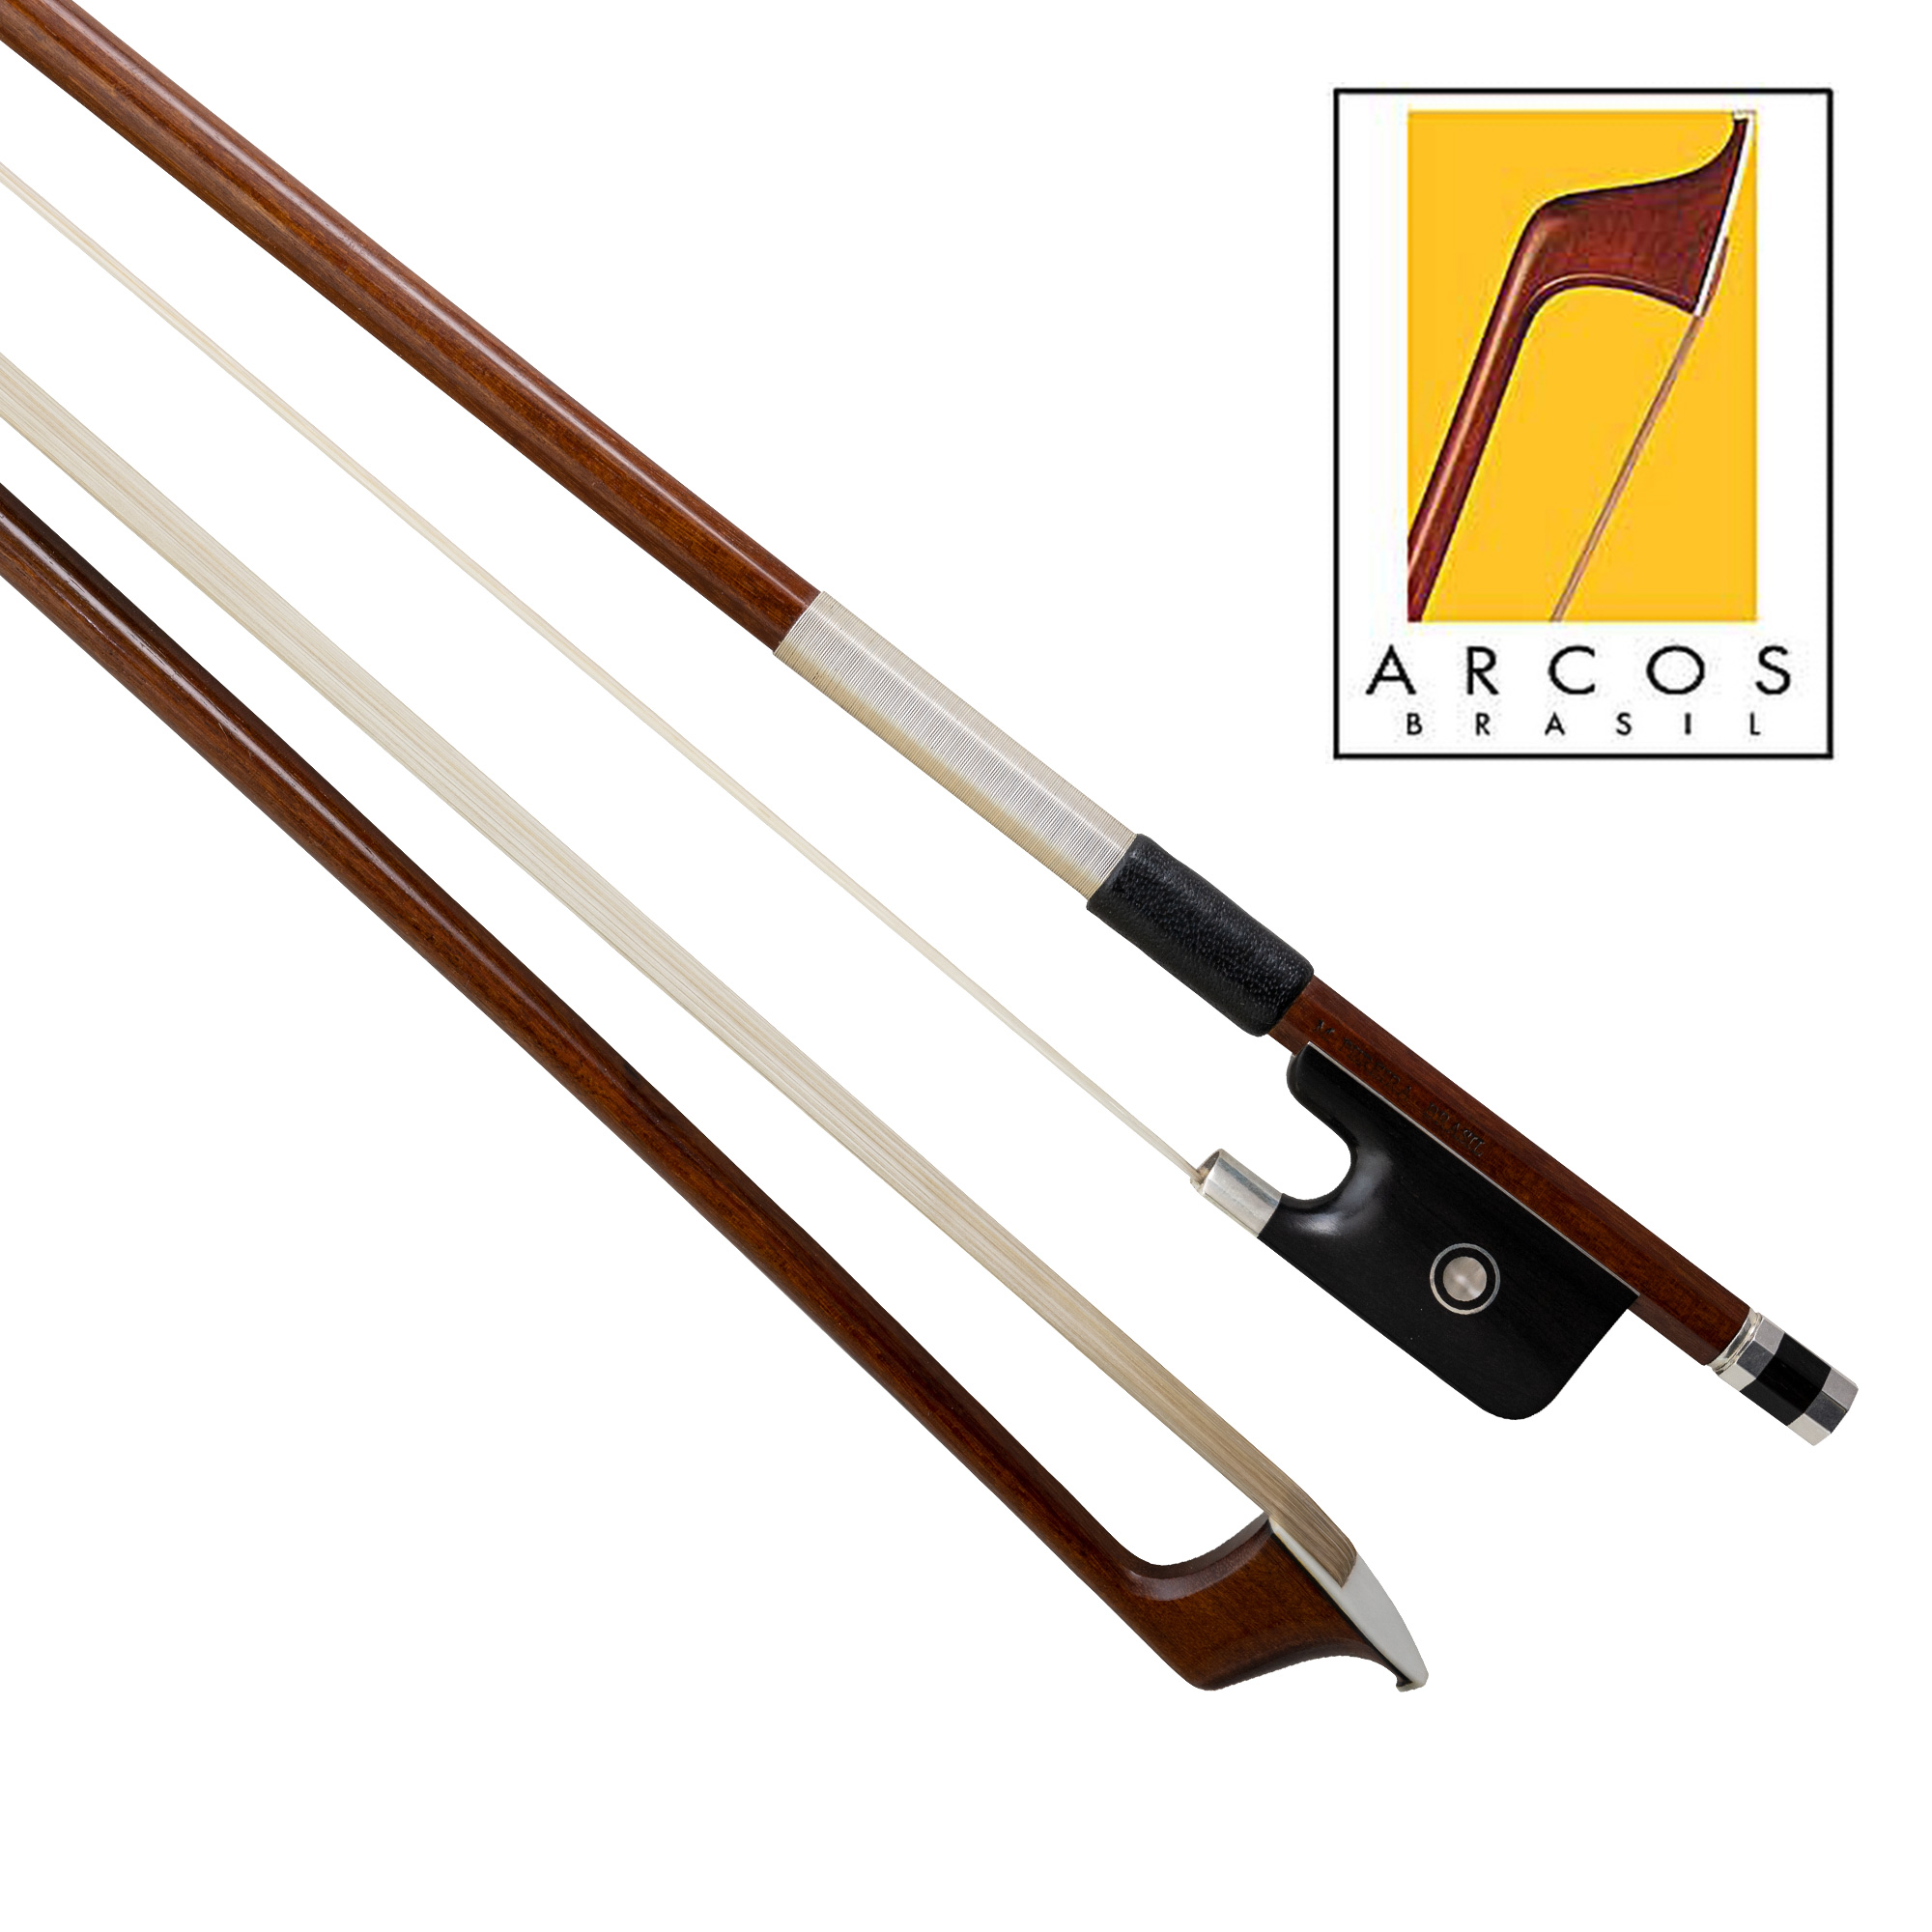 Arcos Brasil Silver Mounted Viola Bow in action